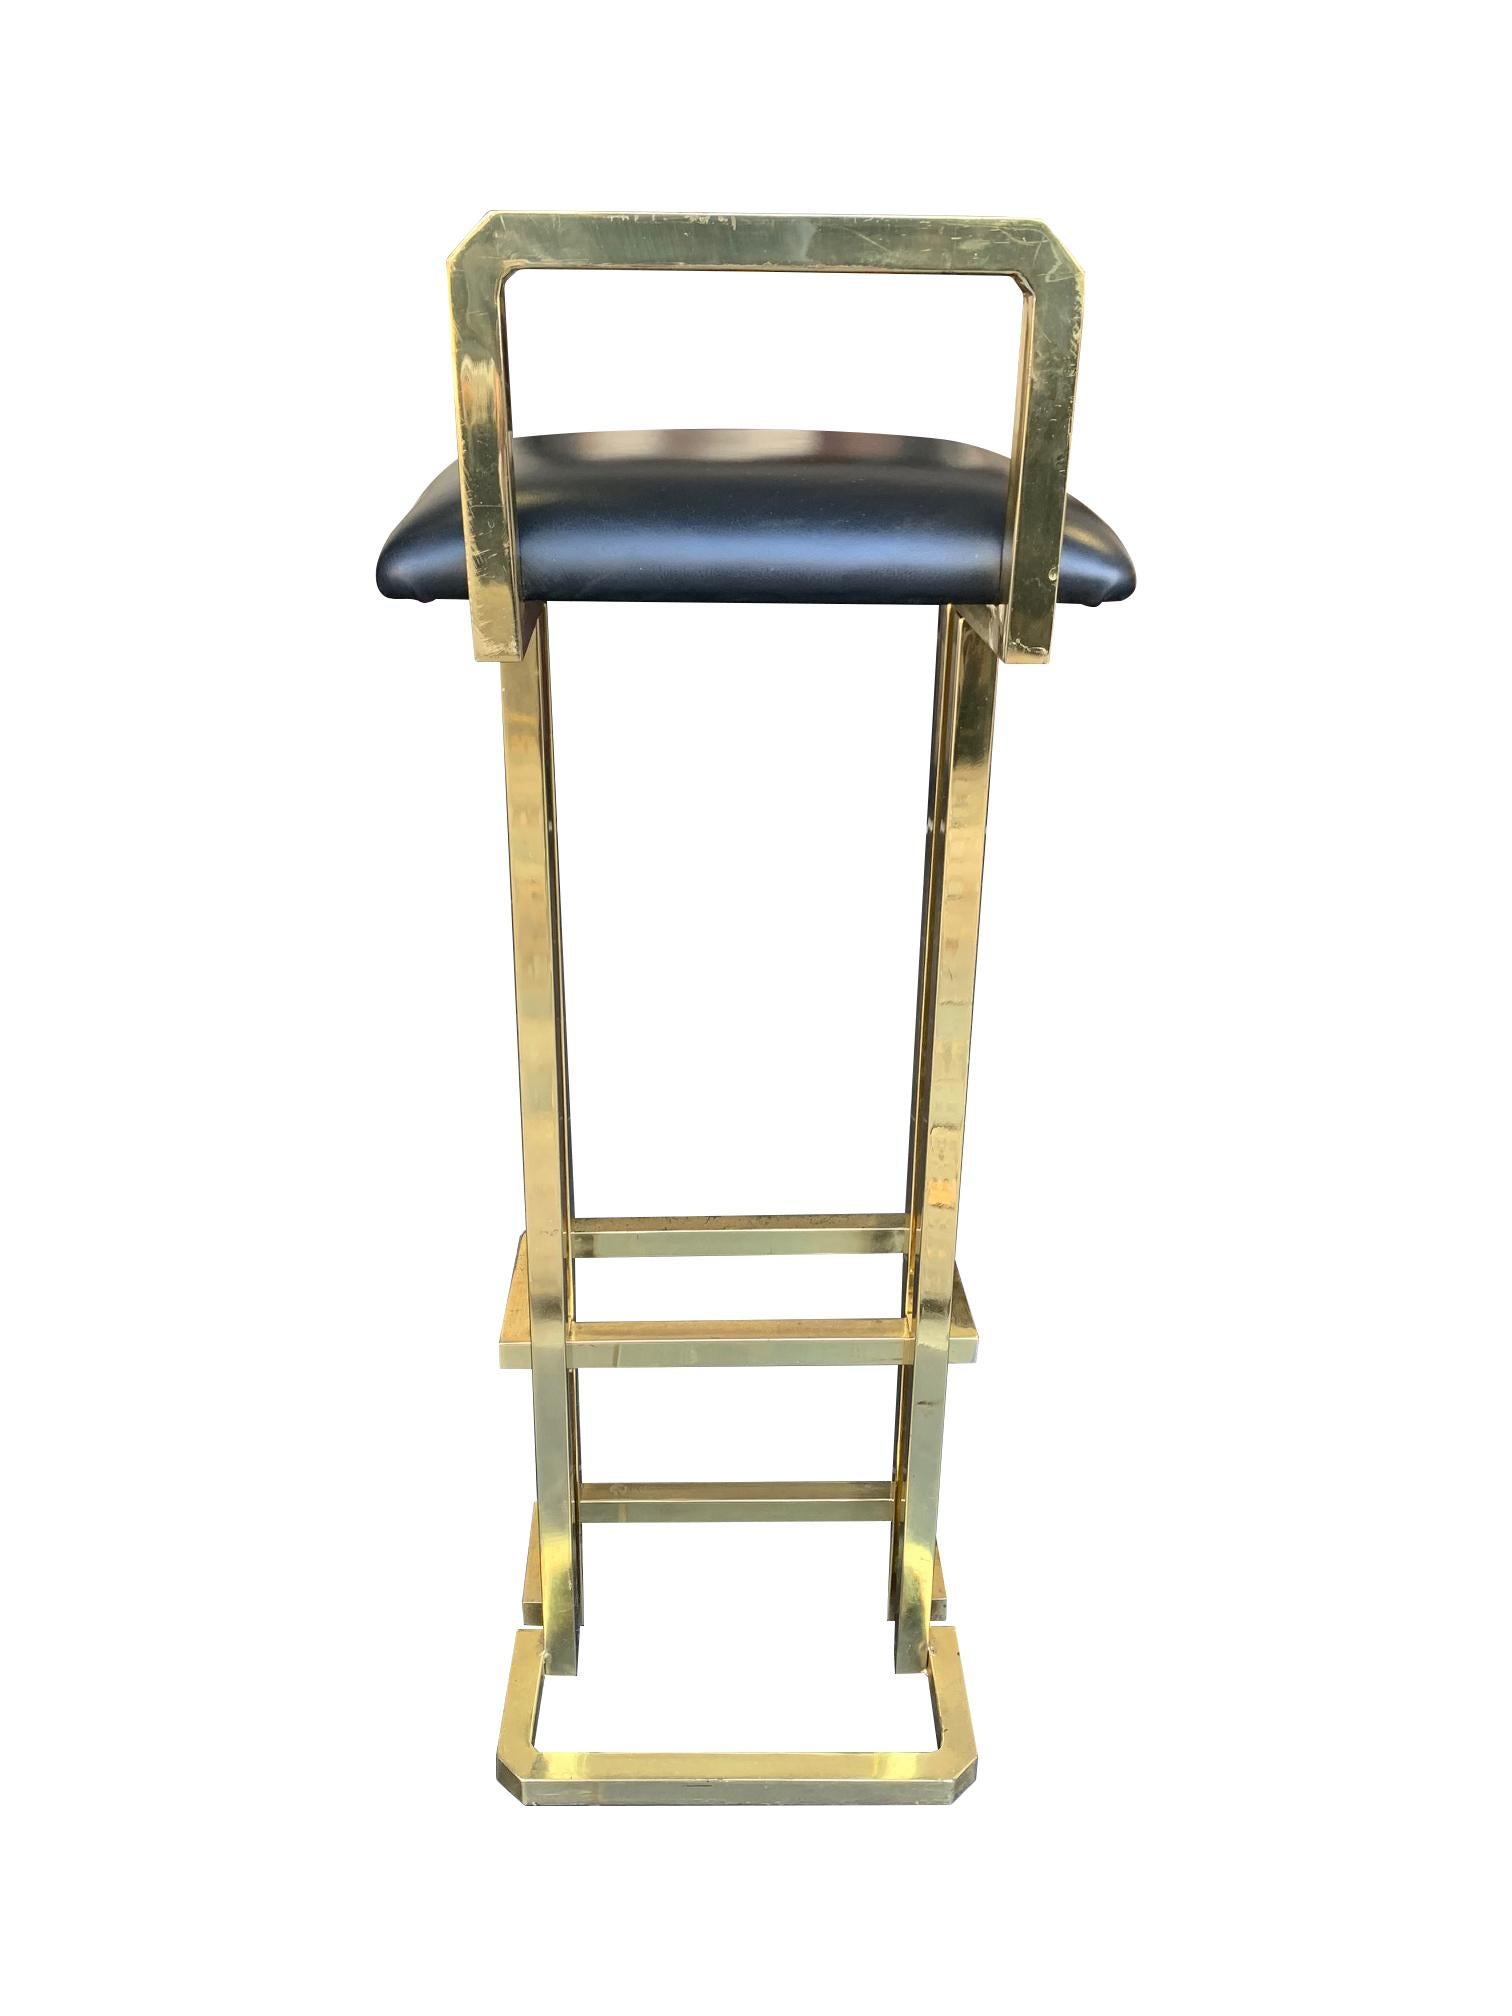 Set of 3 Maison Jansen Style Gilt Metal Stools with Black Leather Seat Pads For Sale 2